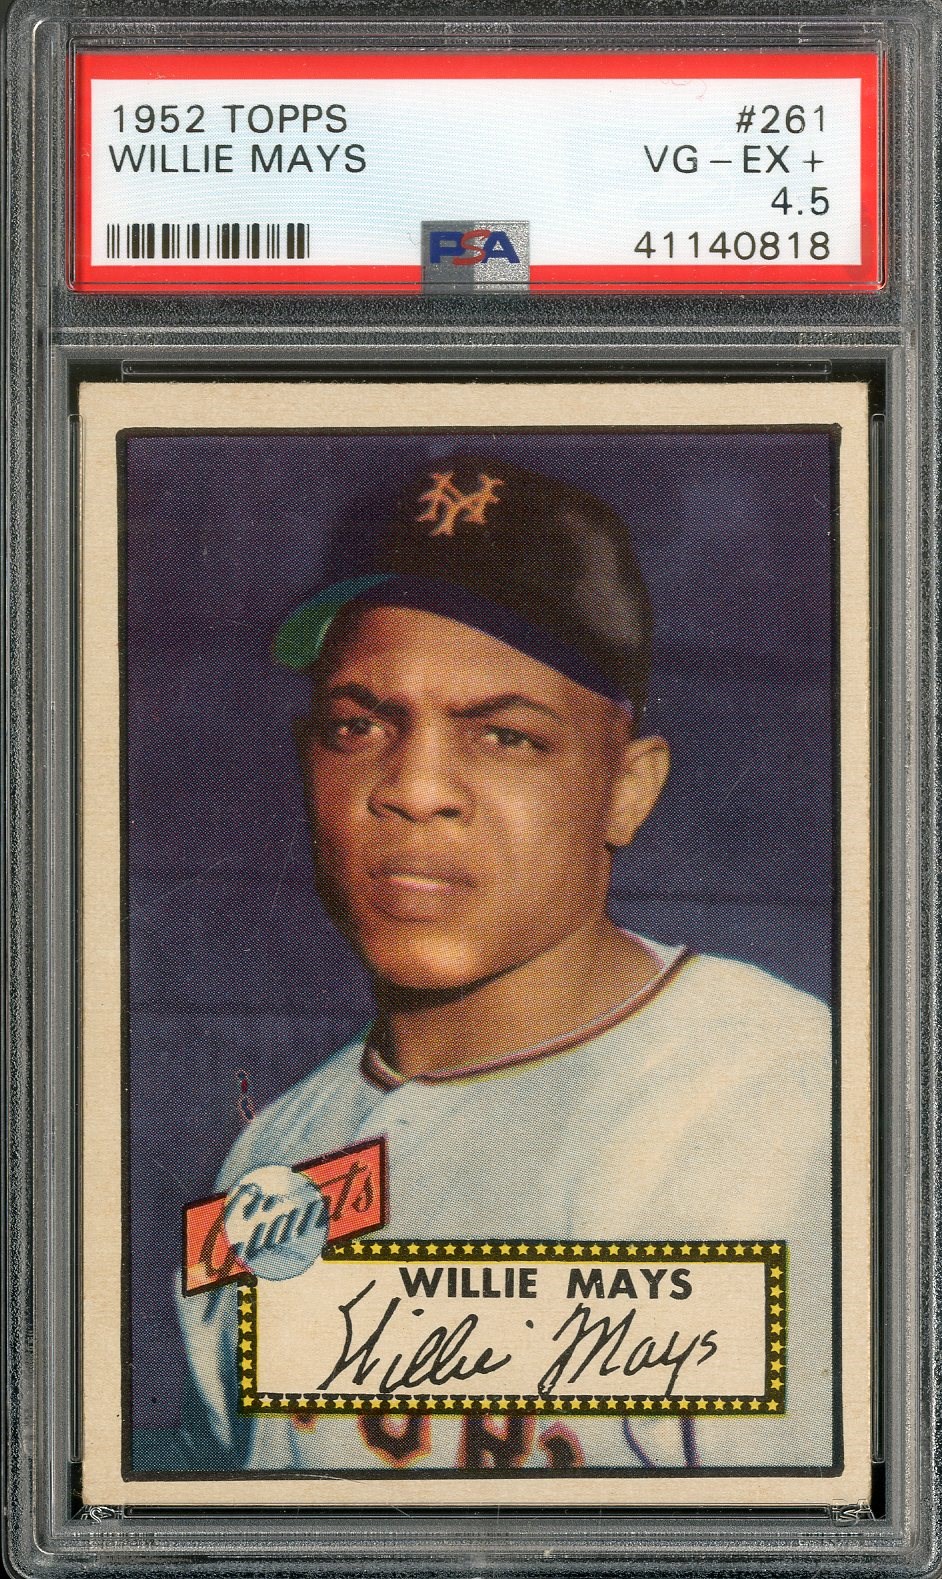 Baseball and Trading Cards - 1952 Topps Willie Mays #261 Rookie (PSA VG-EX+ 4.5)